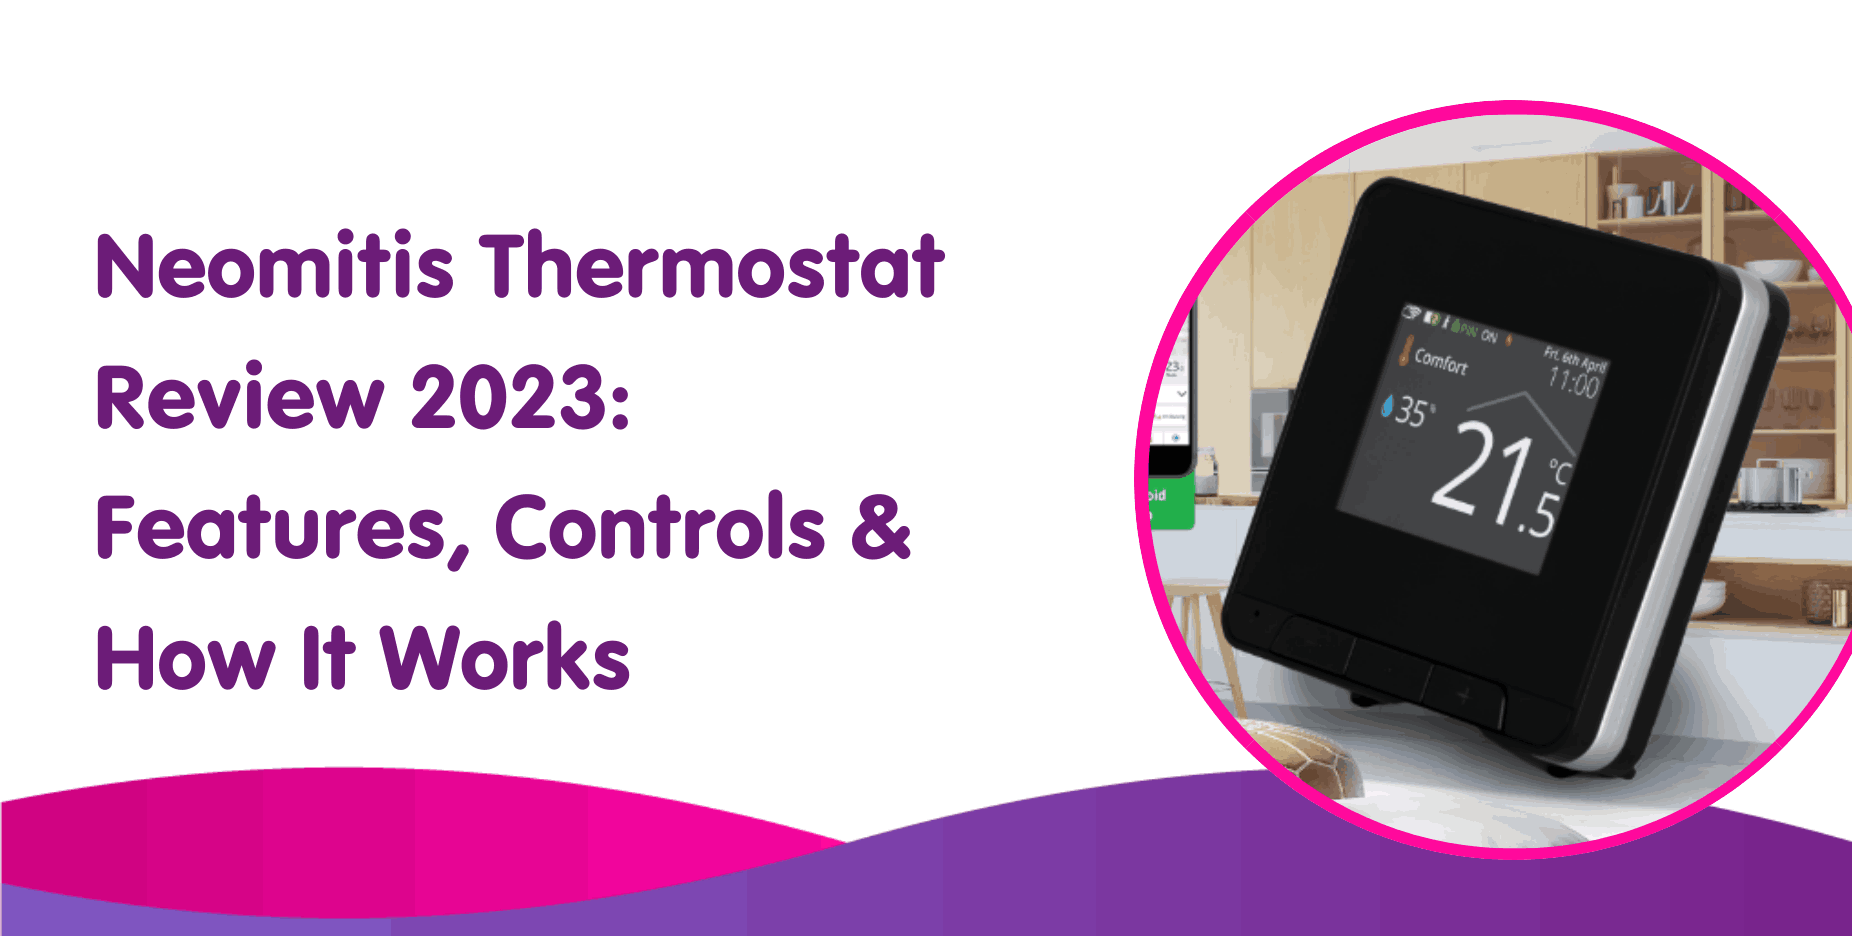 Neomitis Thermostat Review 2023 Features, Controls & How It Works